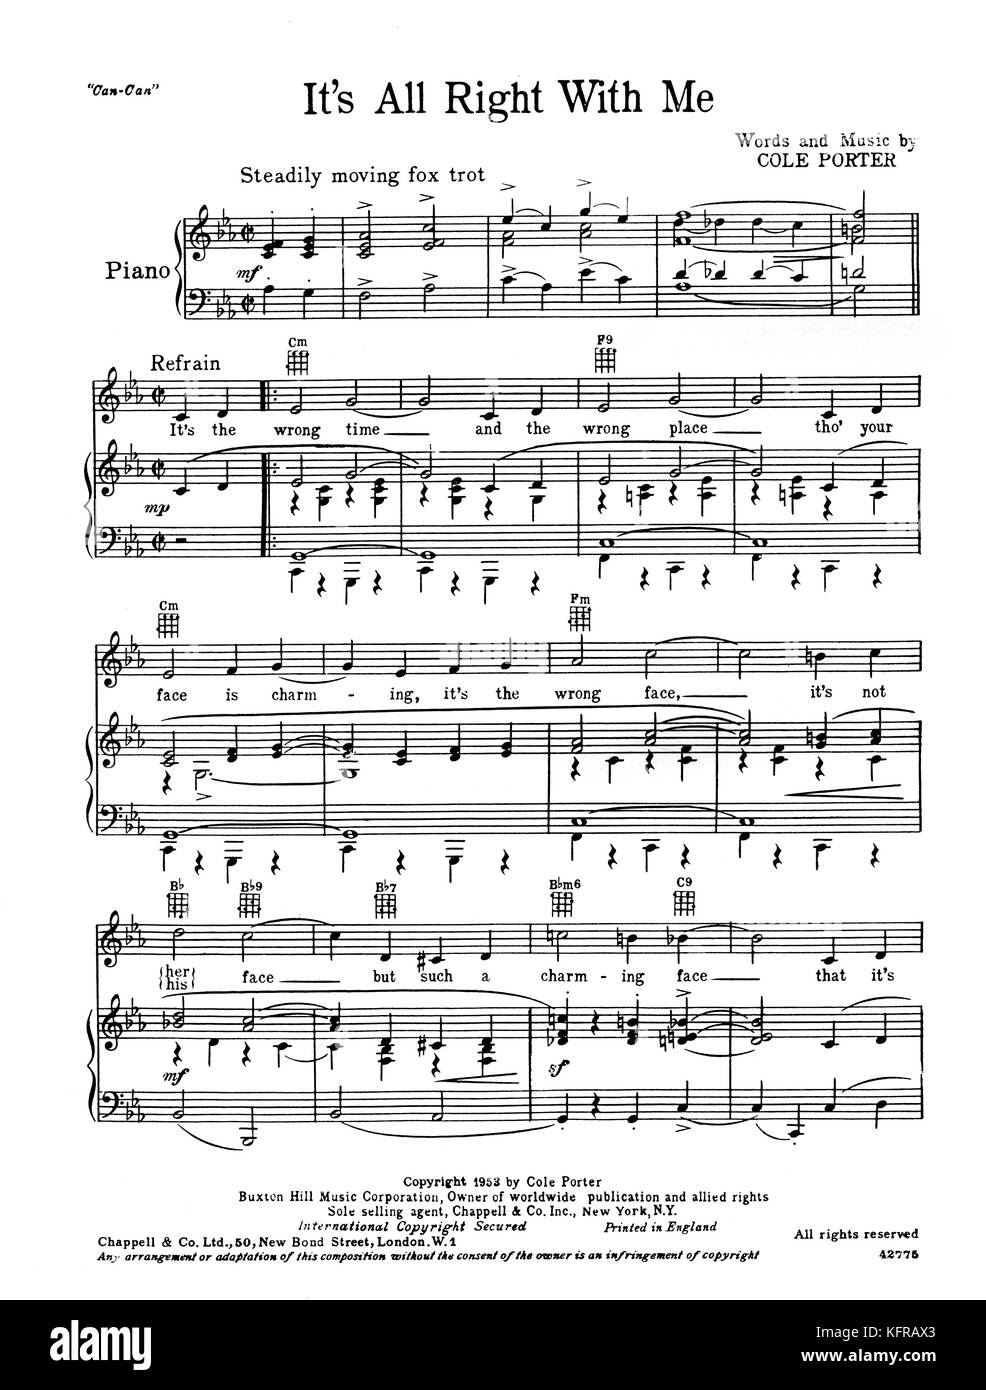 Score for 'It's All Right With Me' by Cole Porter from the 1953 musical, 'Can-Can'. The song was also used in the 1998 musical 'High Society', and has been performed by the likes of Ella Fitzgerald, Frank Sinatra and Tom Waits. CP: American composer and songwriter, 9 June, 1891 – 15 October, 1964. Stock Photo